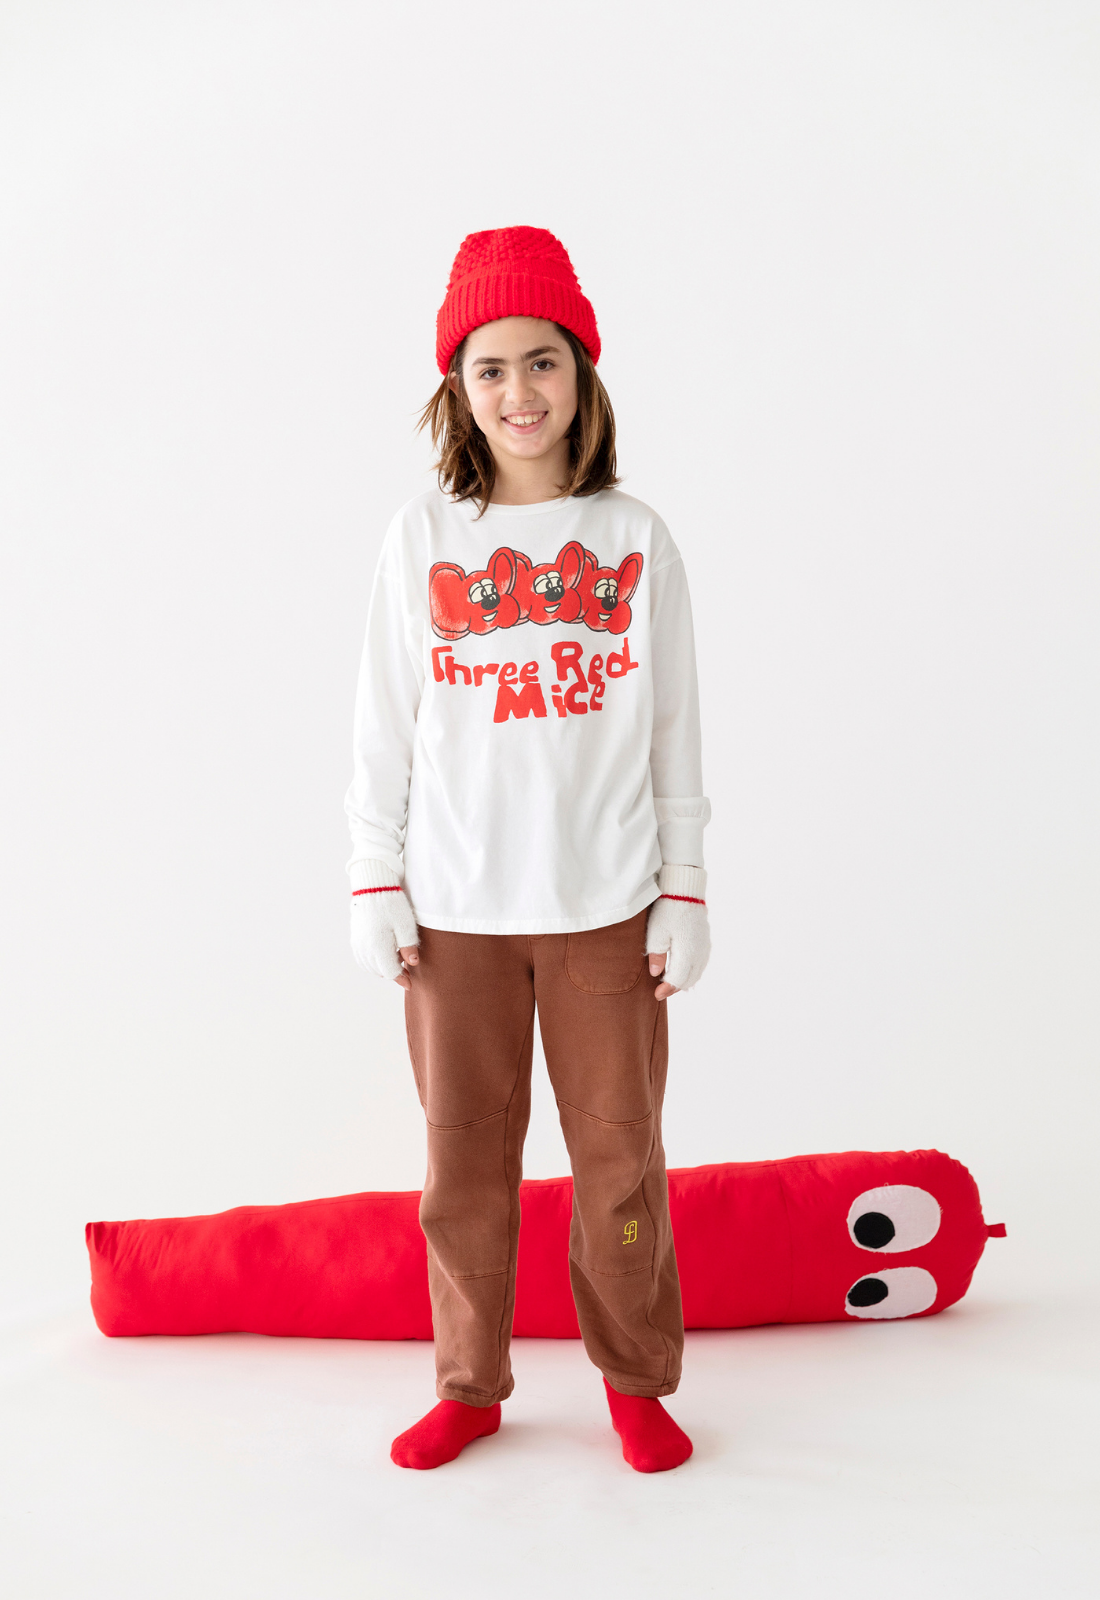 Red Mice T-shirt